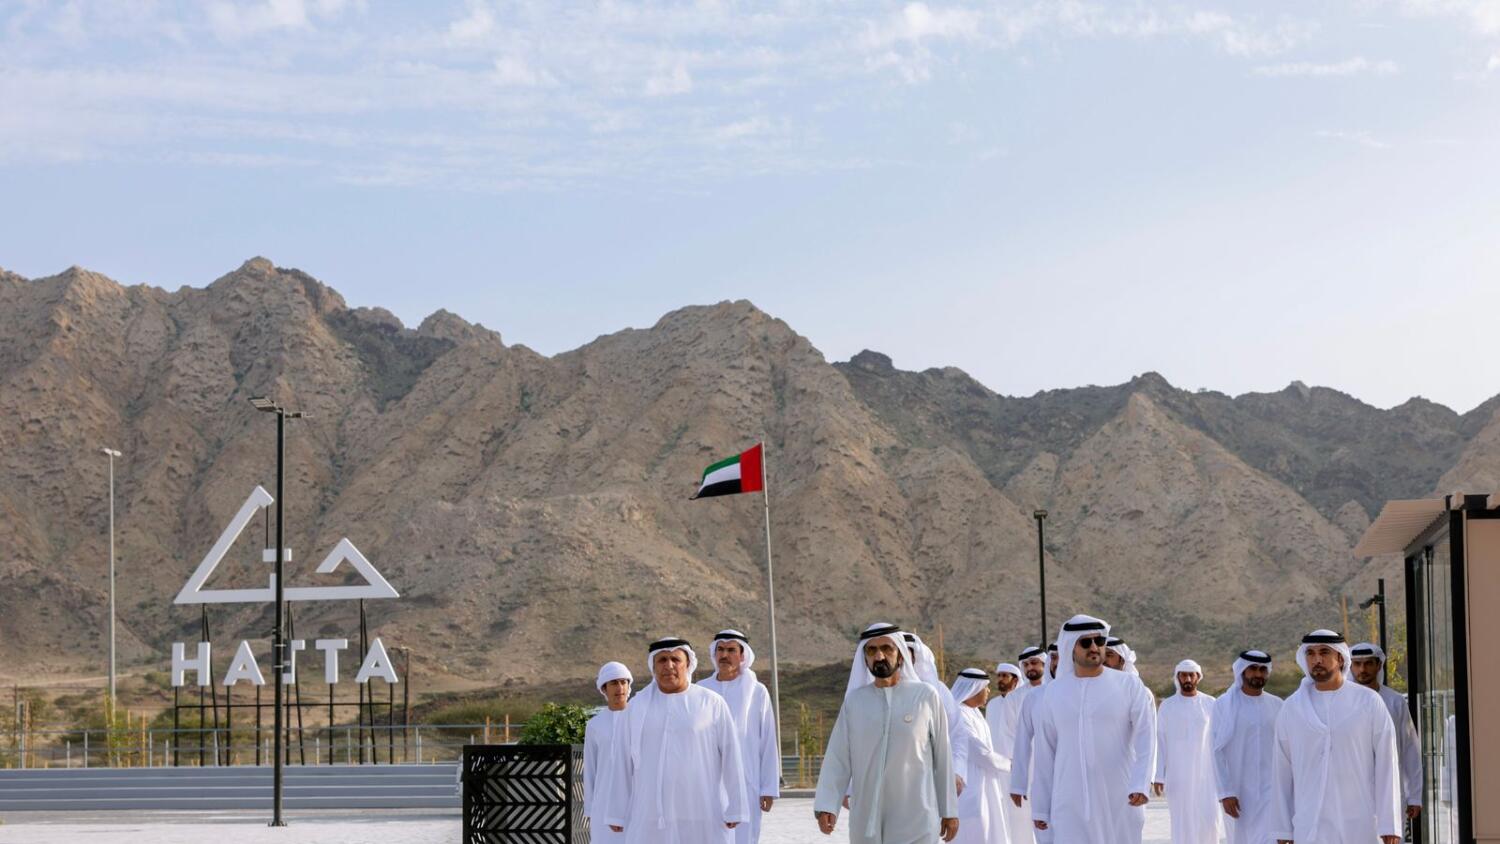 New projects announced in Hatta